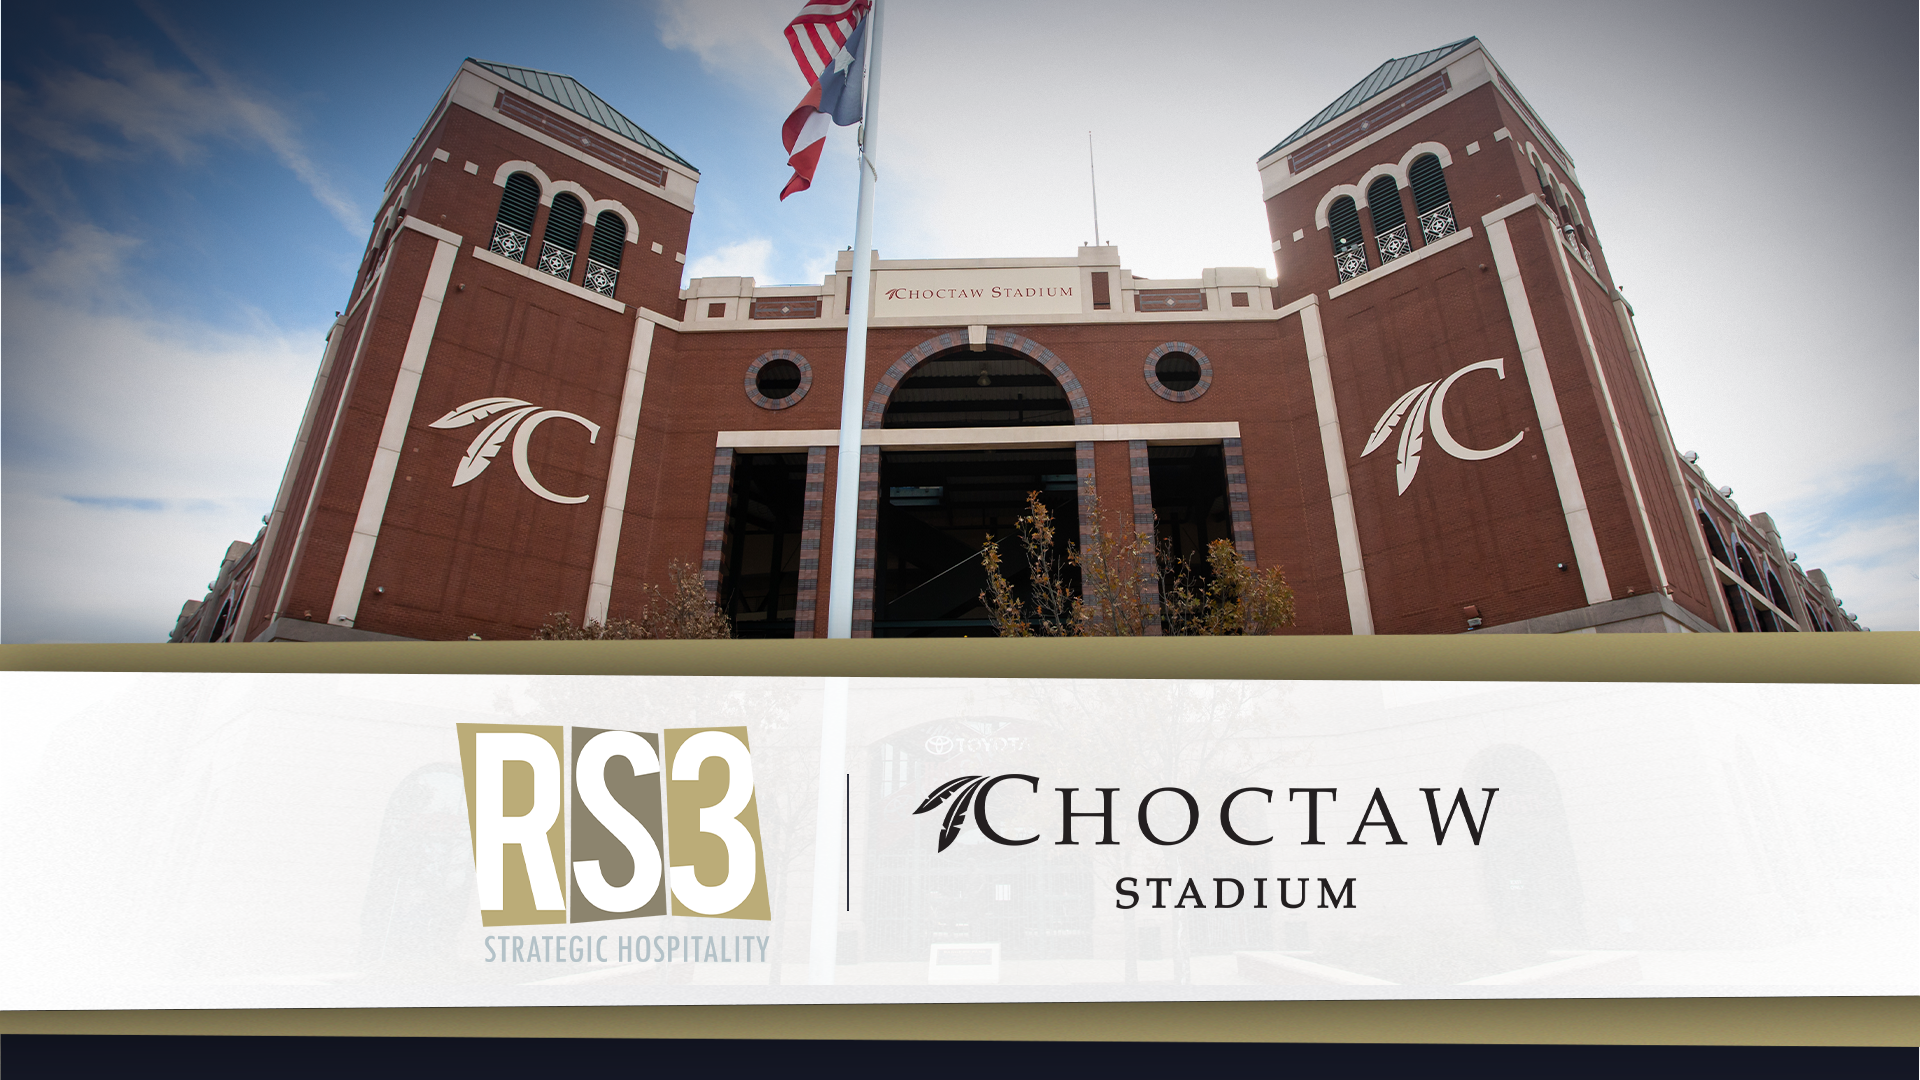 RS3 Strategic Hospitality to Become Official Hospitality Provider for Choctaw Stadium